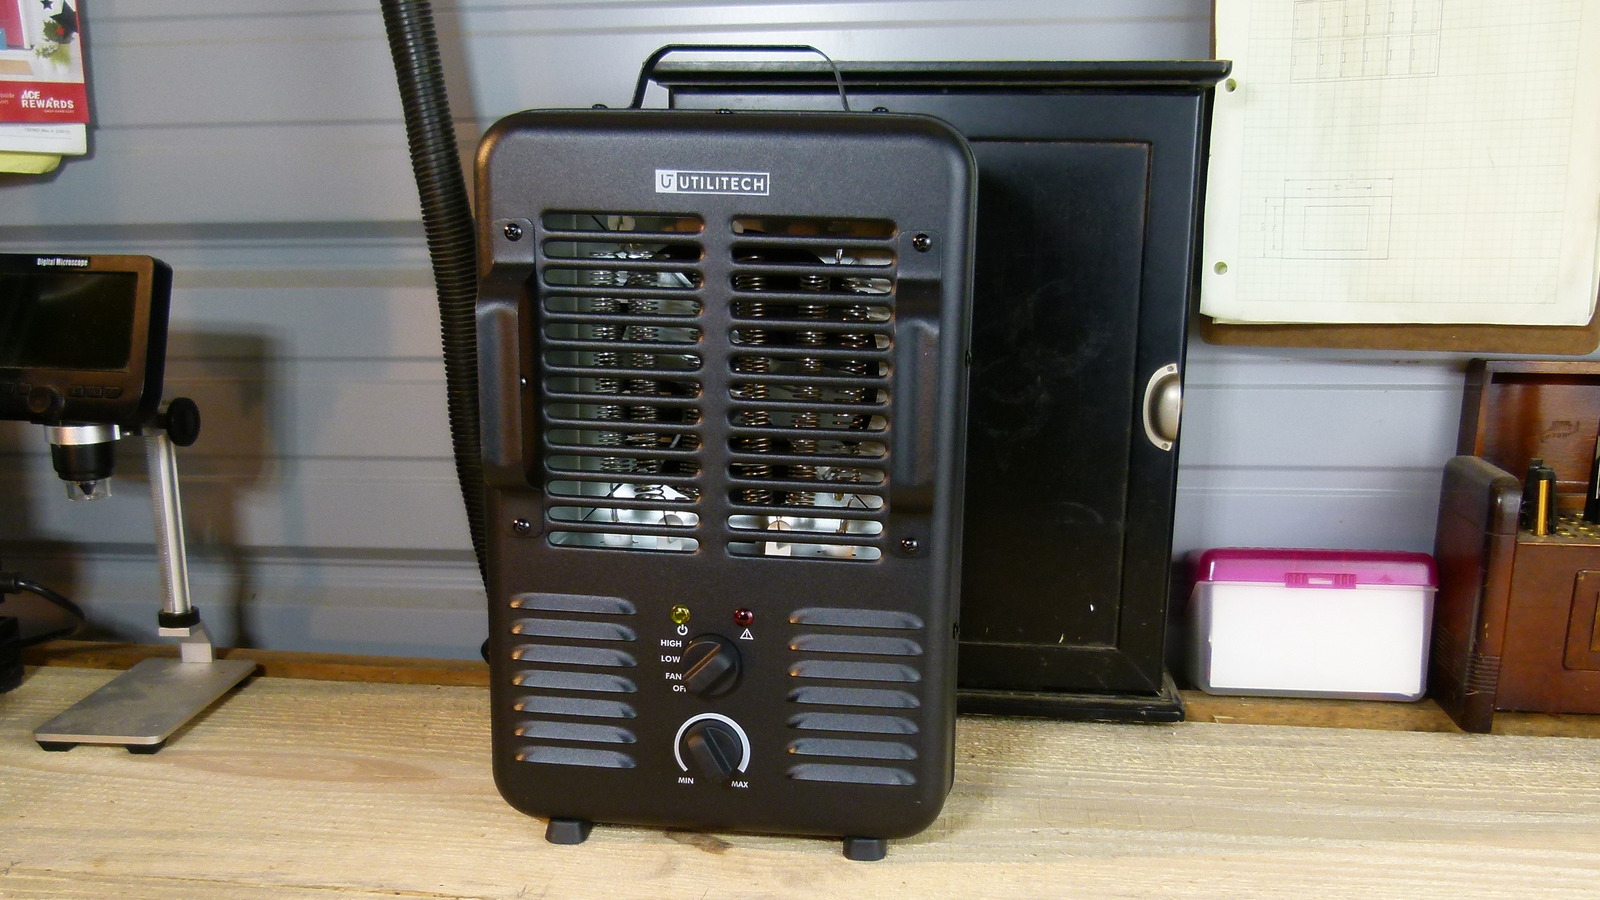 We Tried The Cheapest Space Heater At Lowe's. Here's How It Went